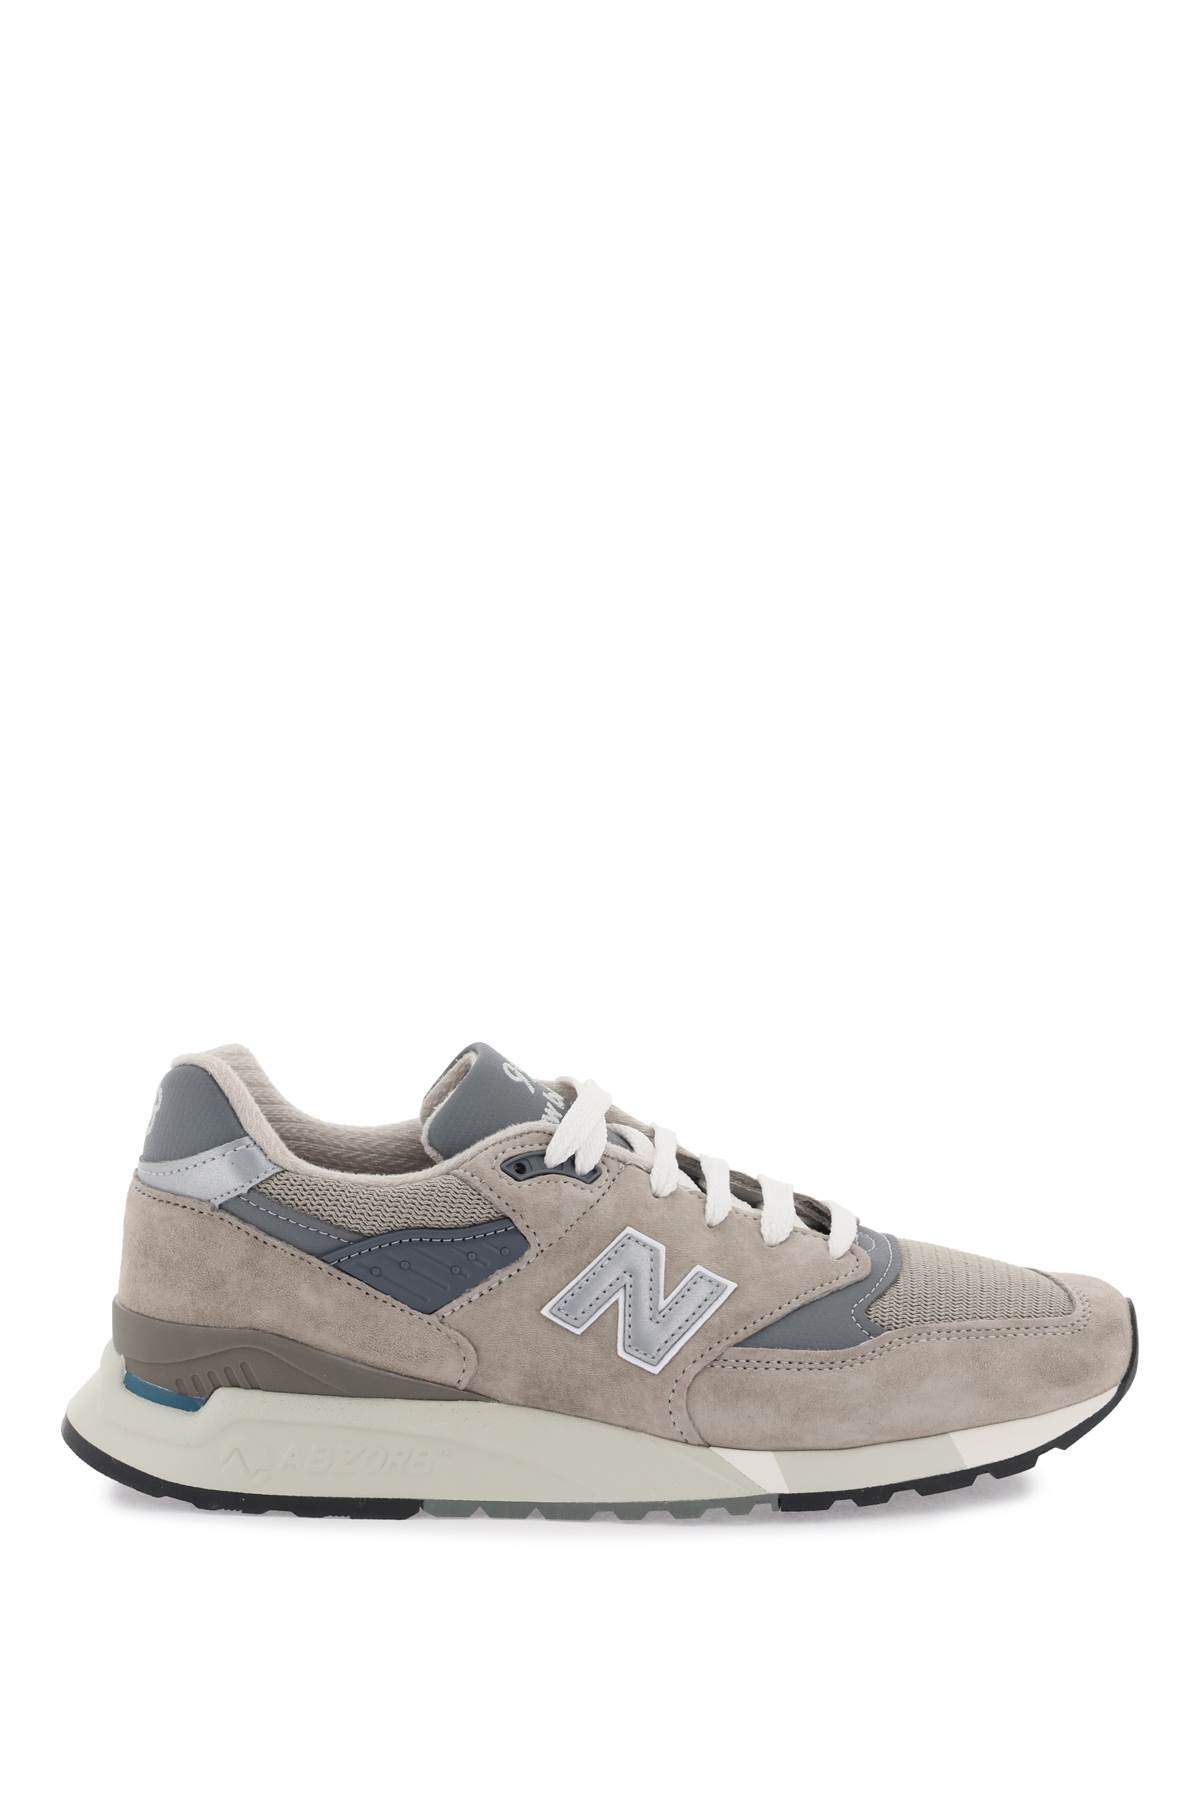 new balance made in usa 998 core sneakers